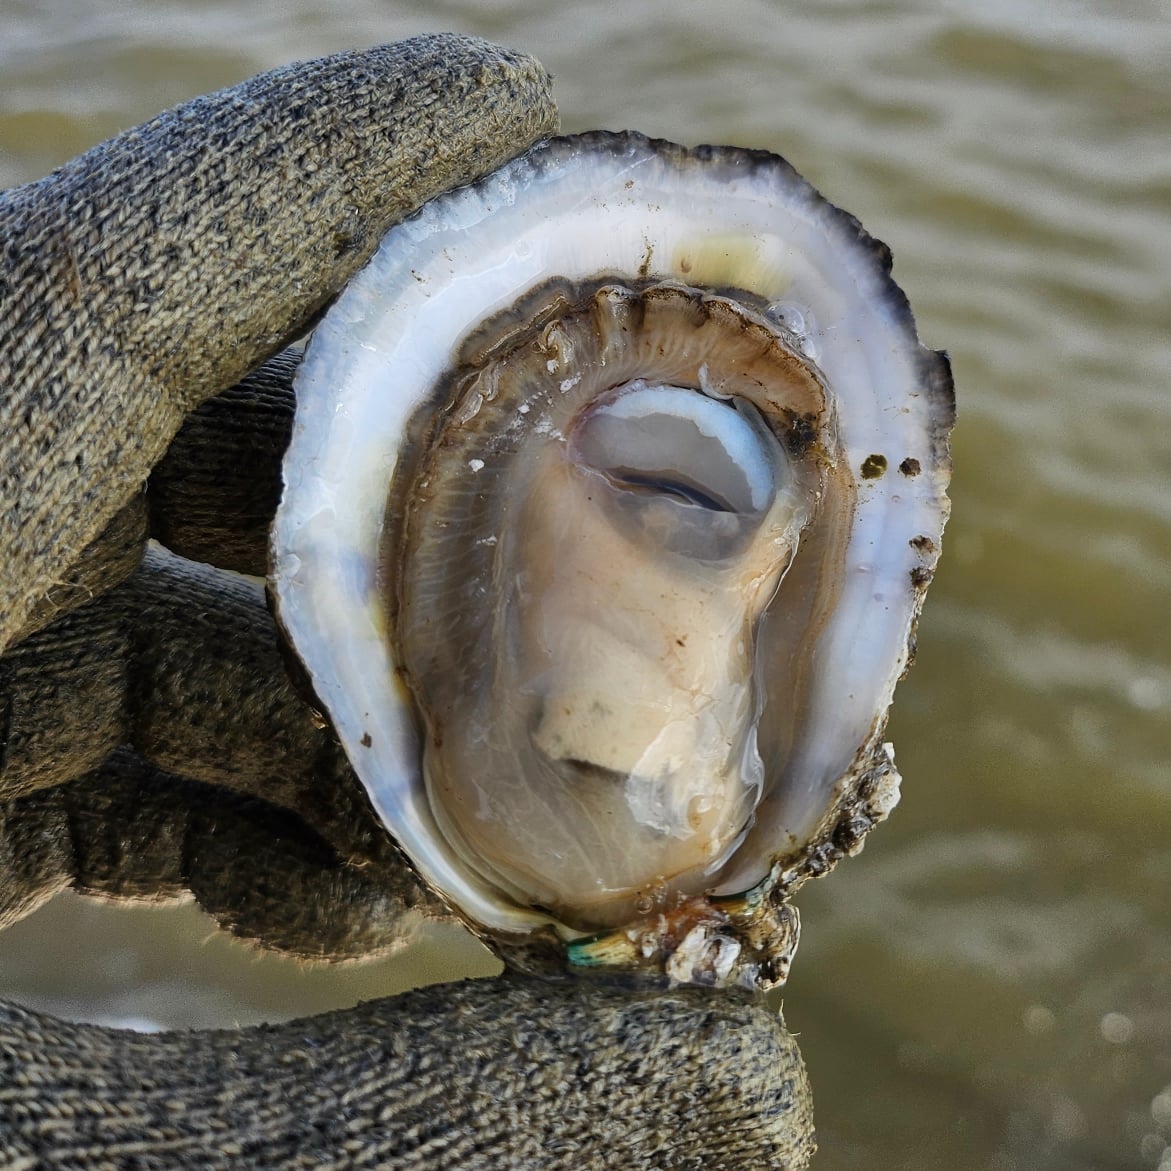 50 Oysters DELIVERED December  17th  to New Orleans Area (See PARISHES in Description)